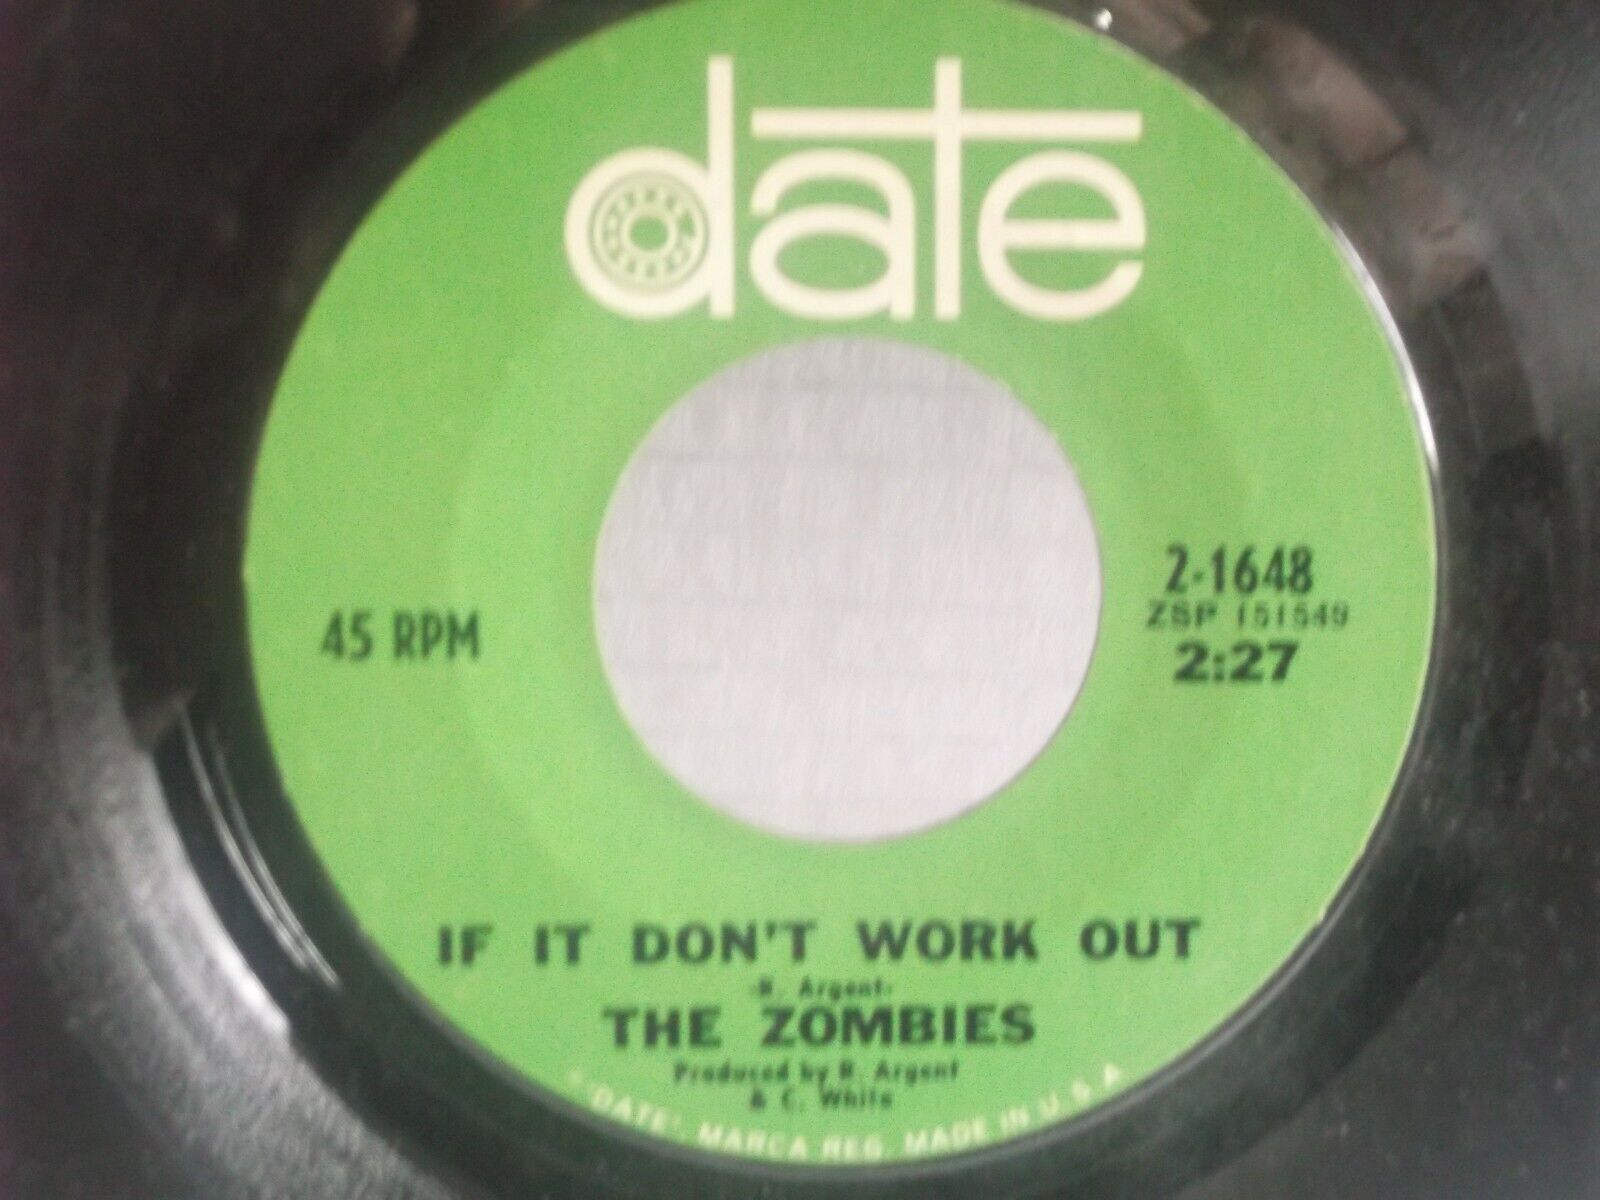 The Zombies,Date 1648,\